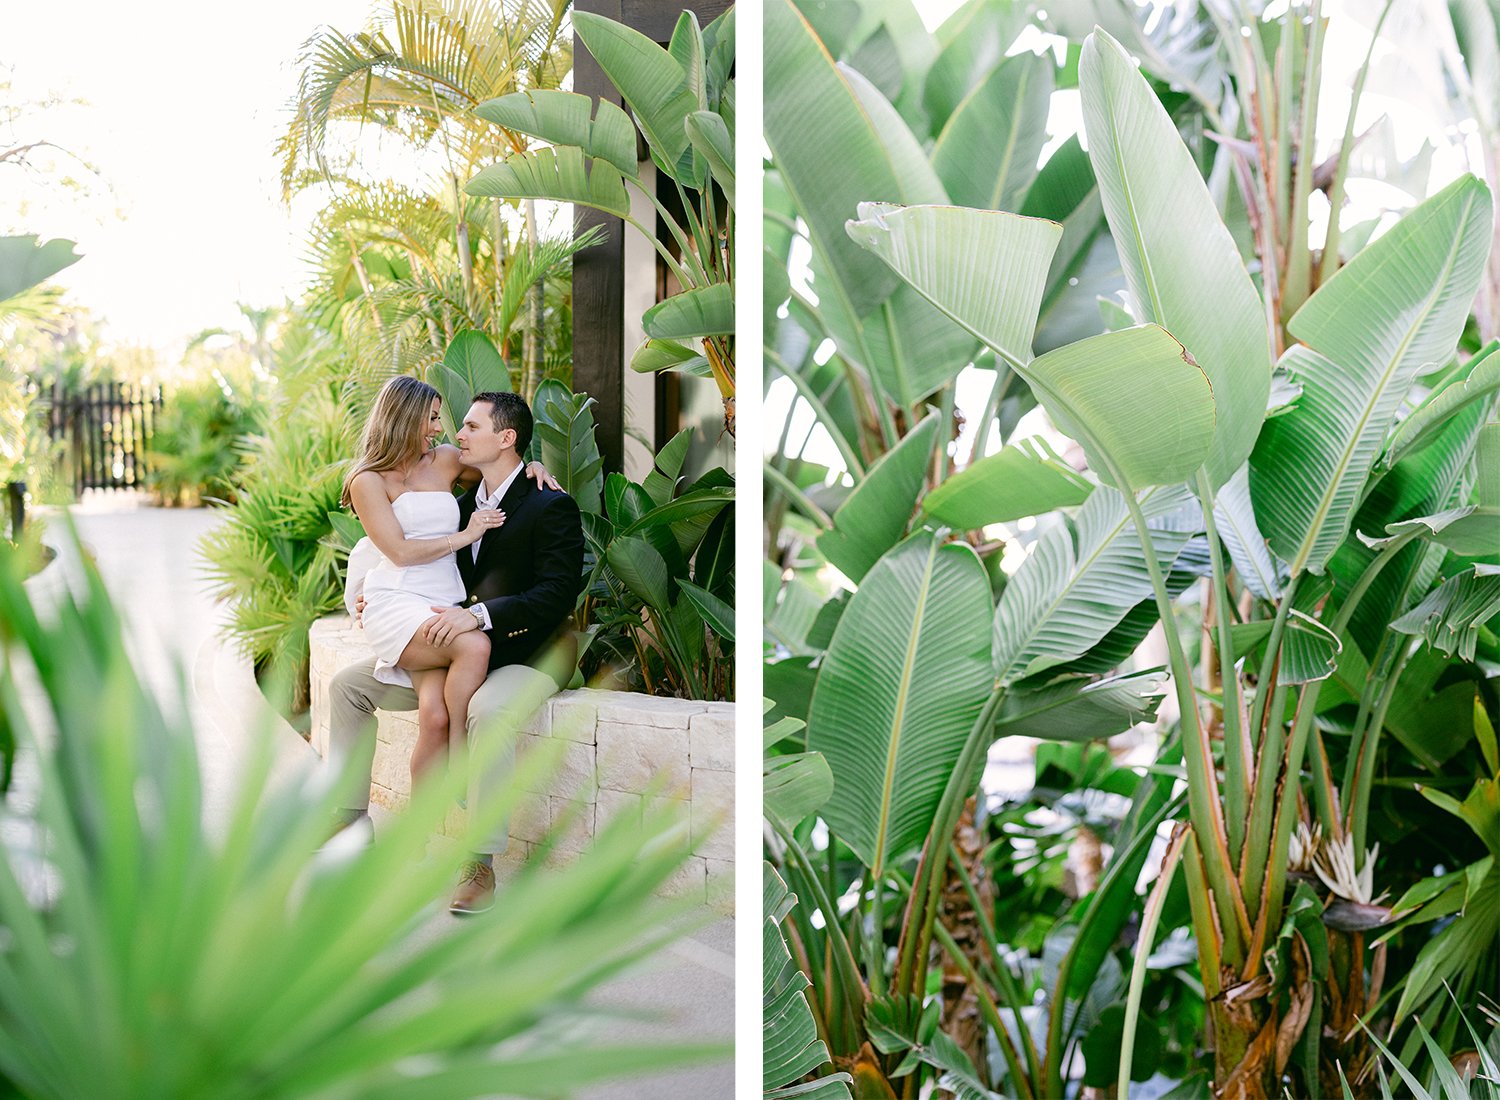 05 sneaking camera capturing groom with bride in white dress sitting on his lap alone smiling and looking at each other with green tropical palm trees and nature behind at Dreams Riviera Cancun.JPG